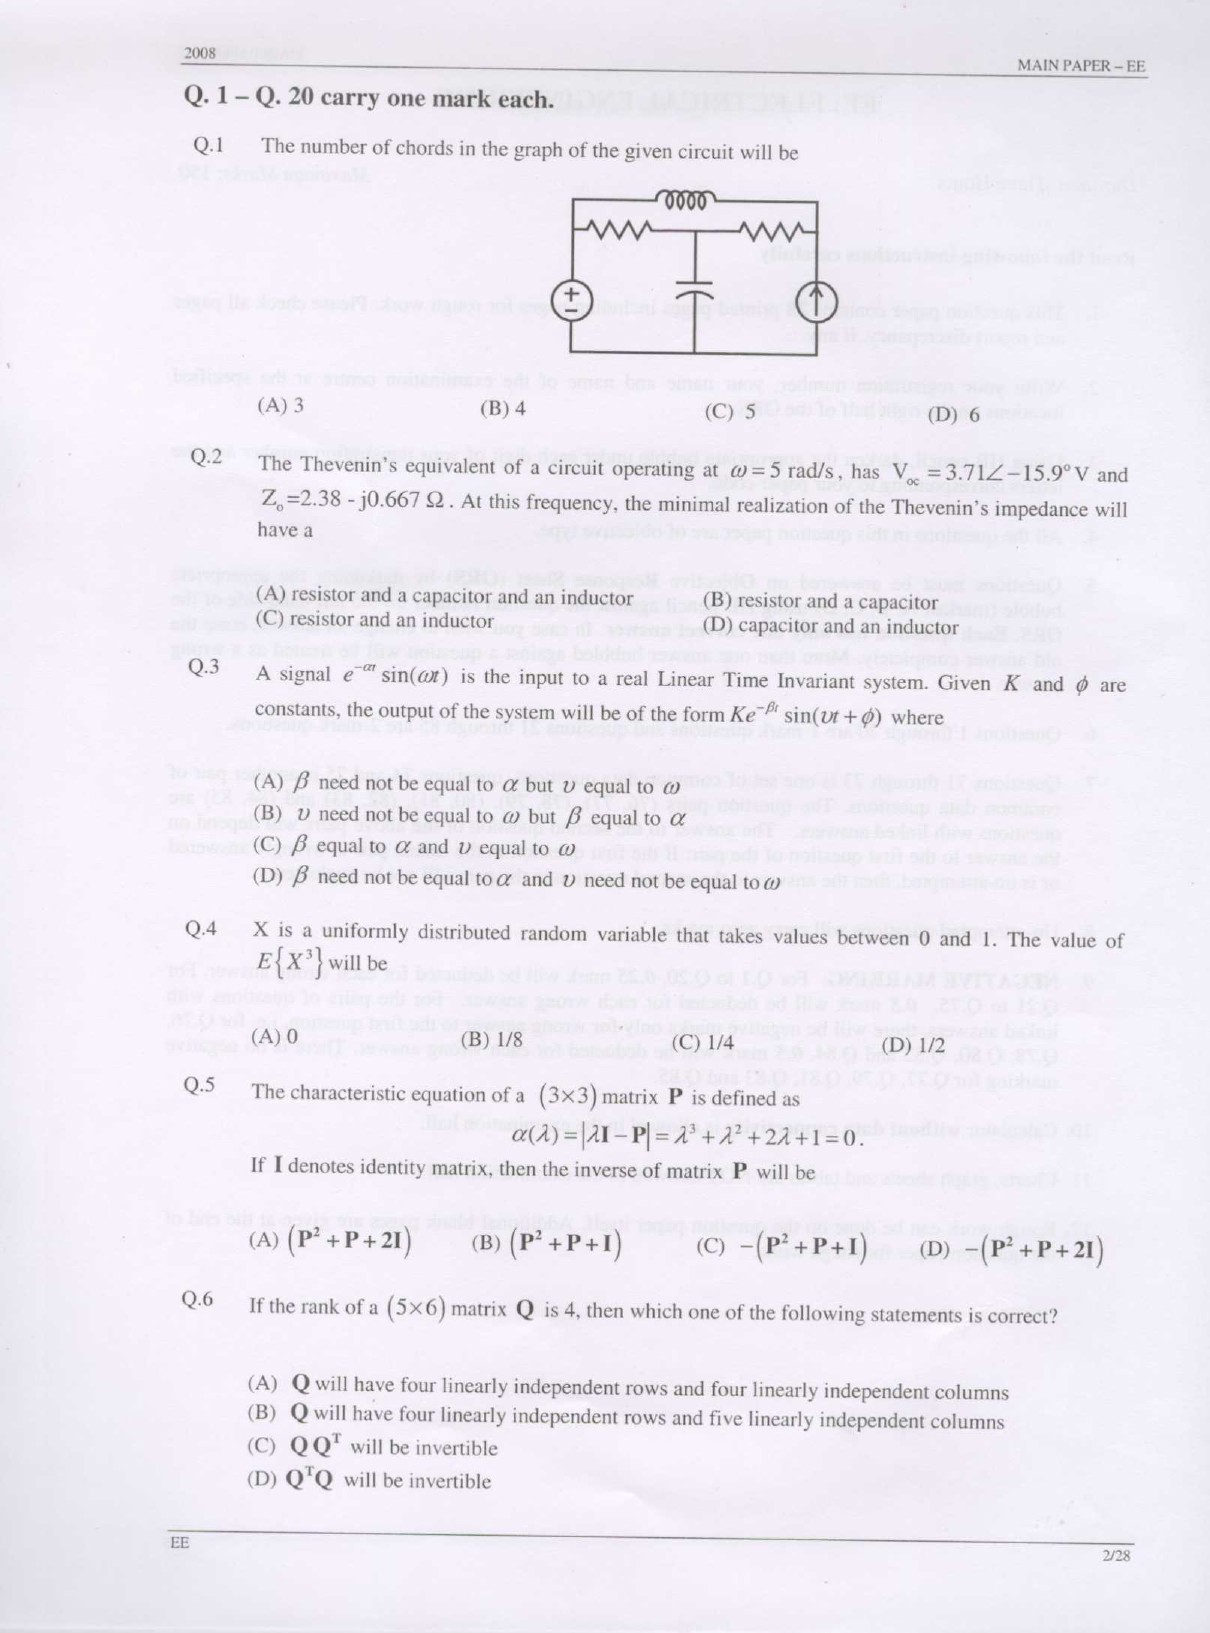 GATE Exam Question Paper 2008 Electrical Engineering 2